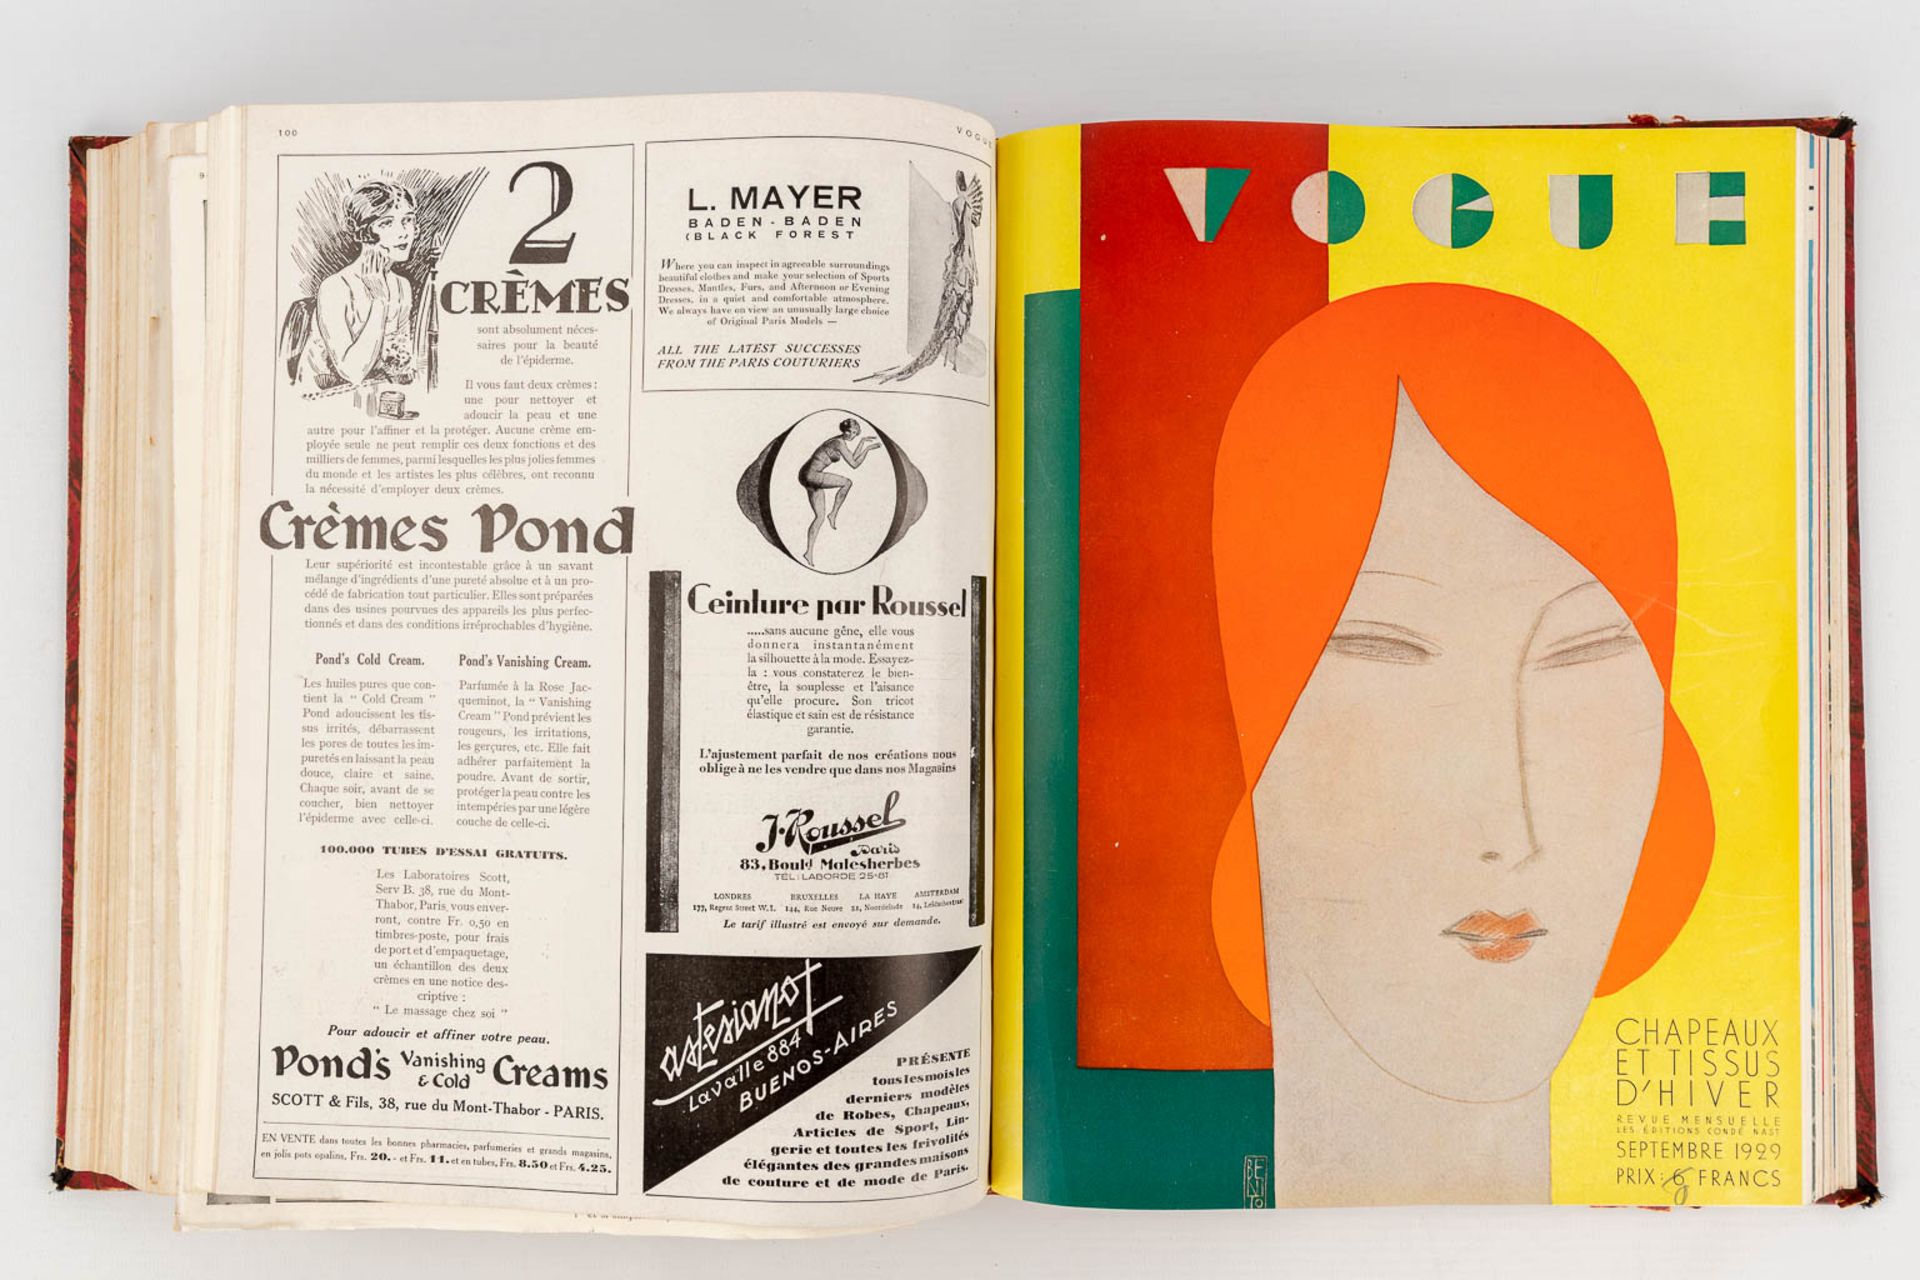 An assembled book with the Vogue magazine, 1929. (L: 5 x W: 25,5 x H: 31,5 cm) - Image 11 of 18